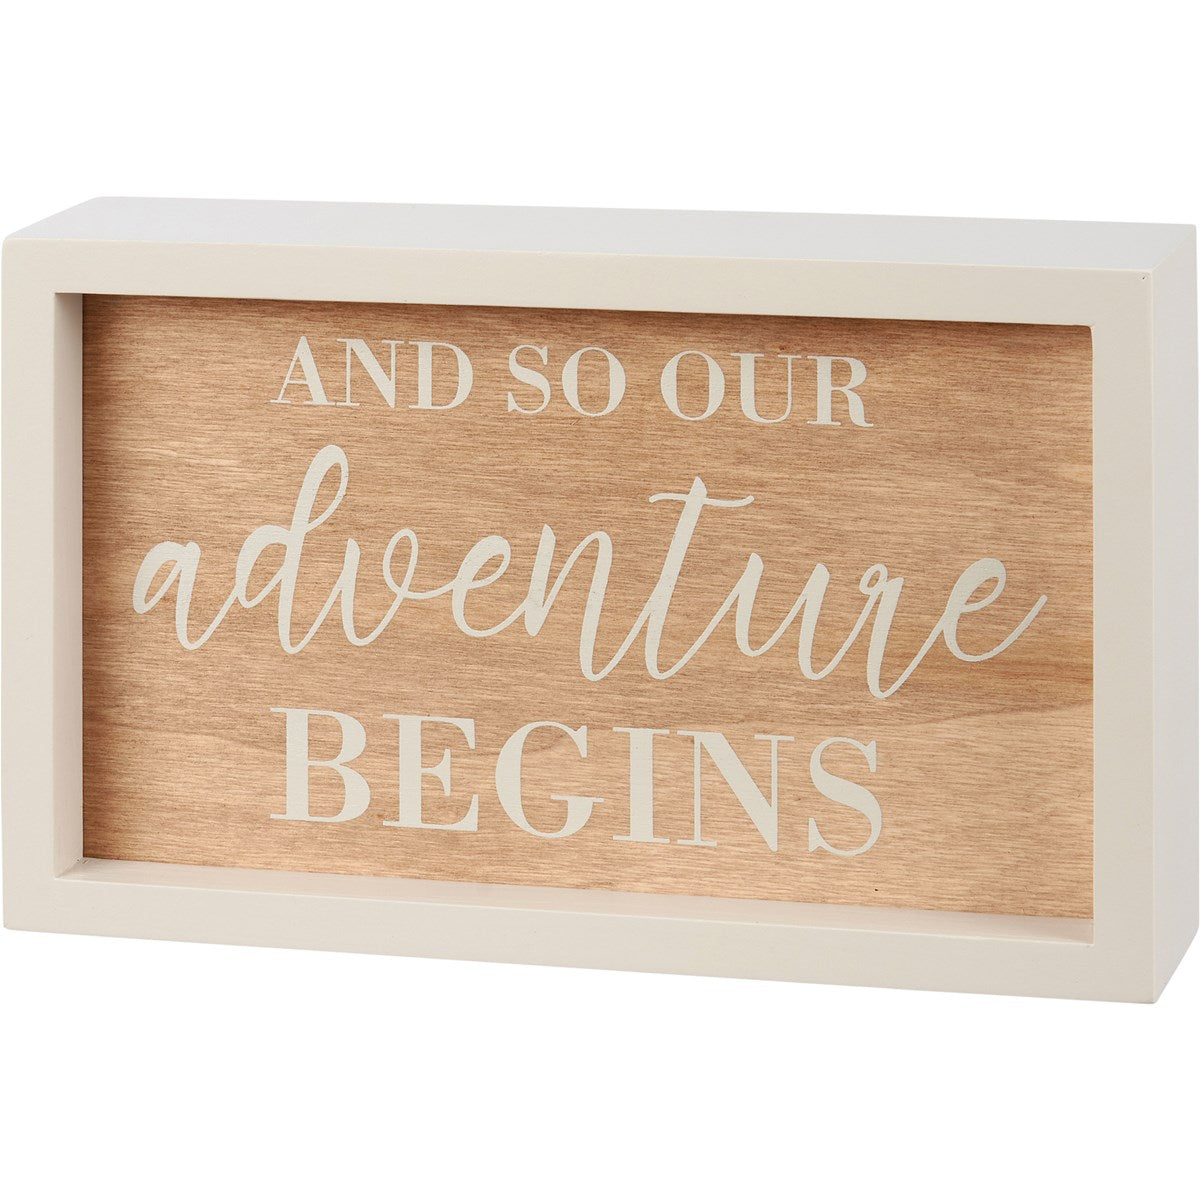 Our Adventure Begins Box Sign